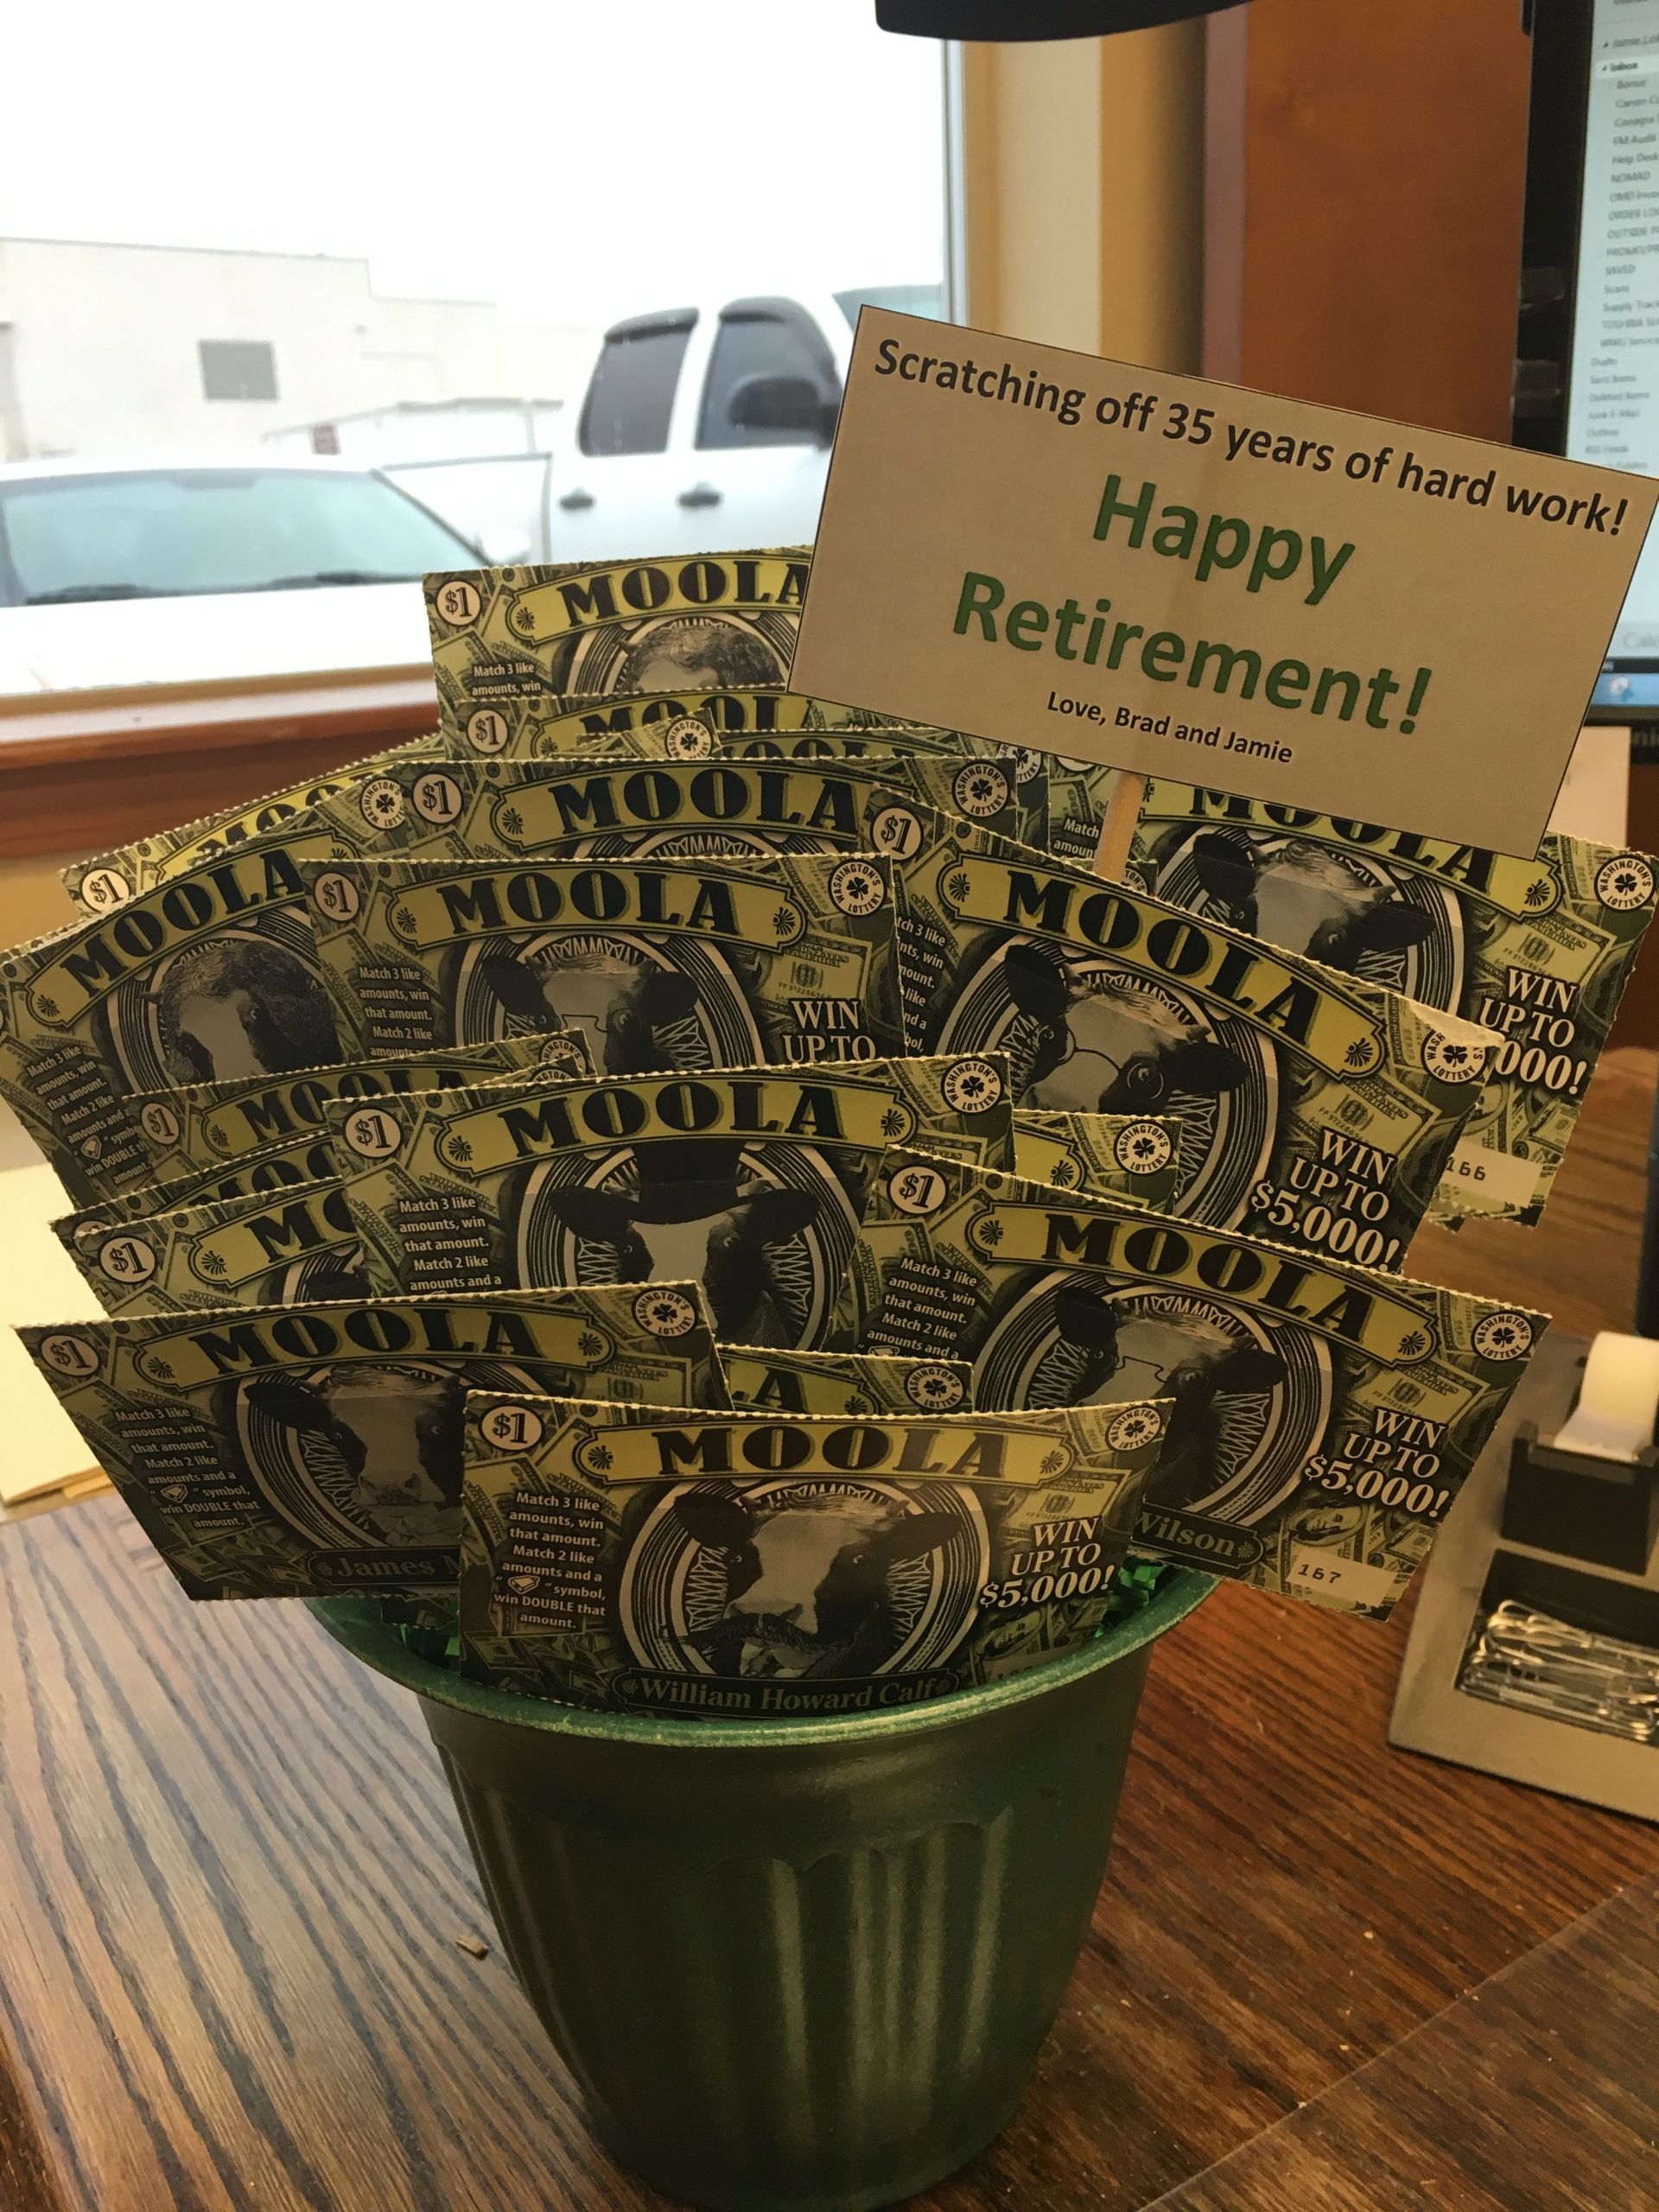 Coworker Retirement Party Ideas
 Pin on Ideas